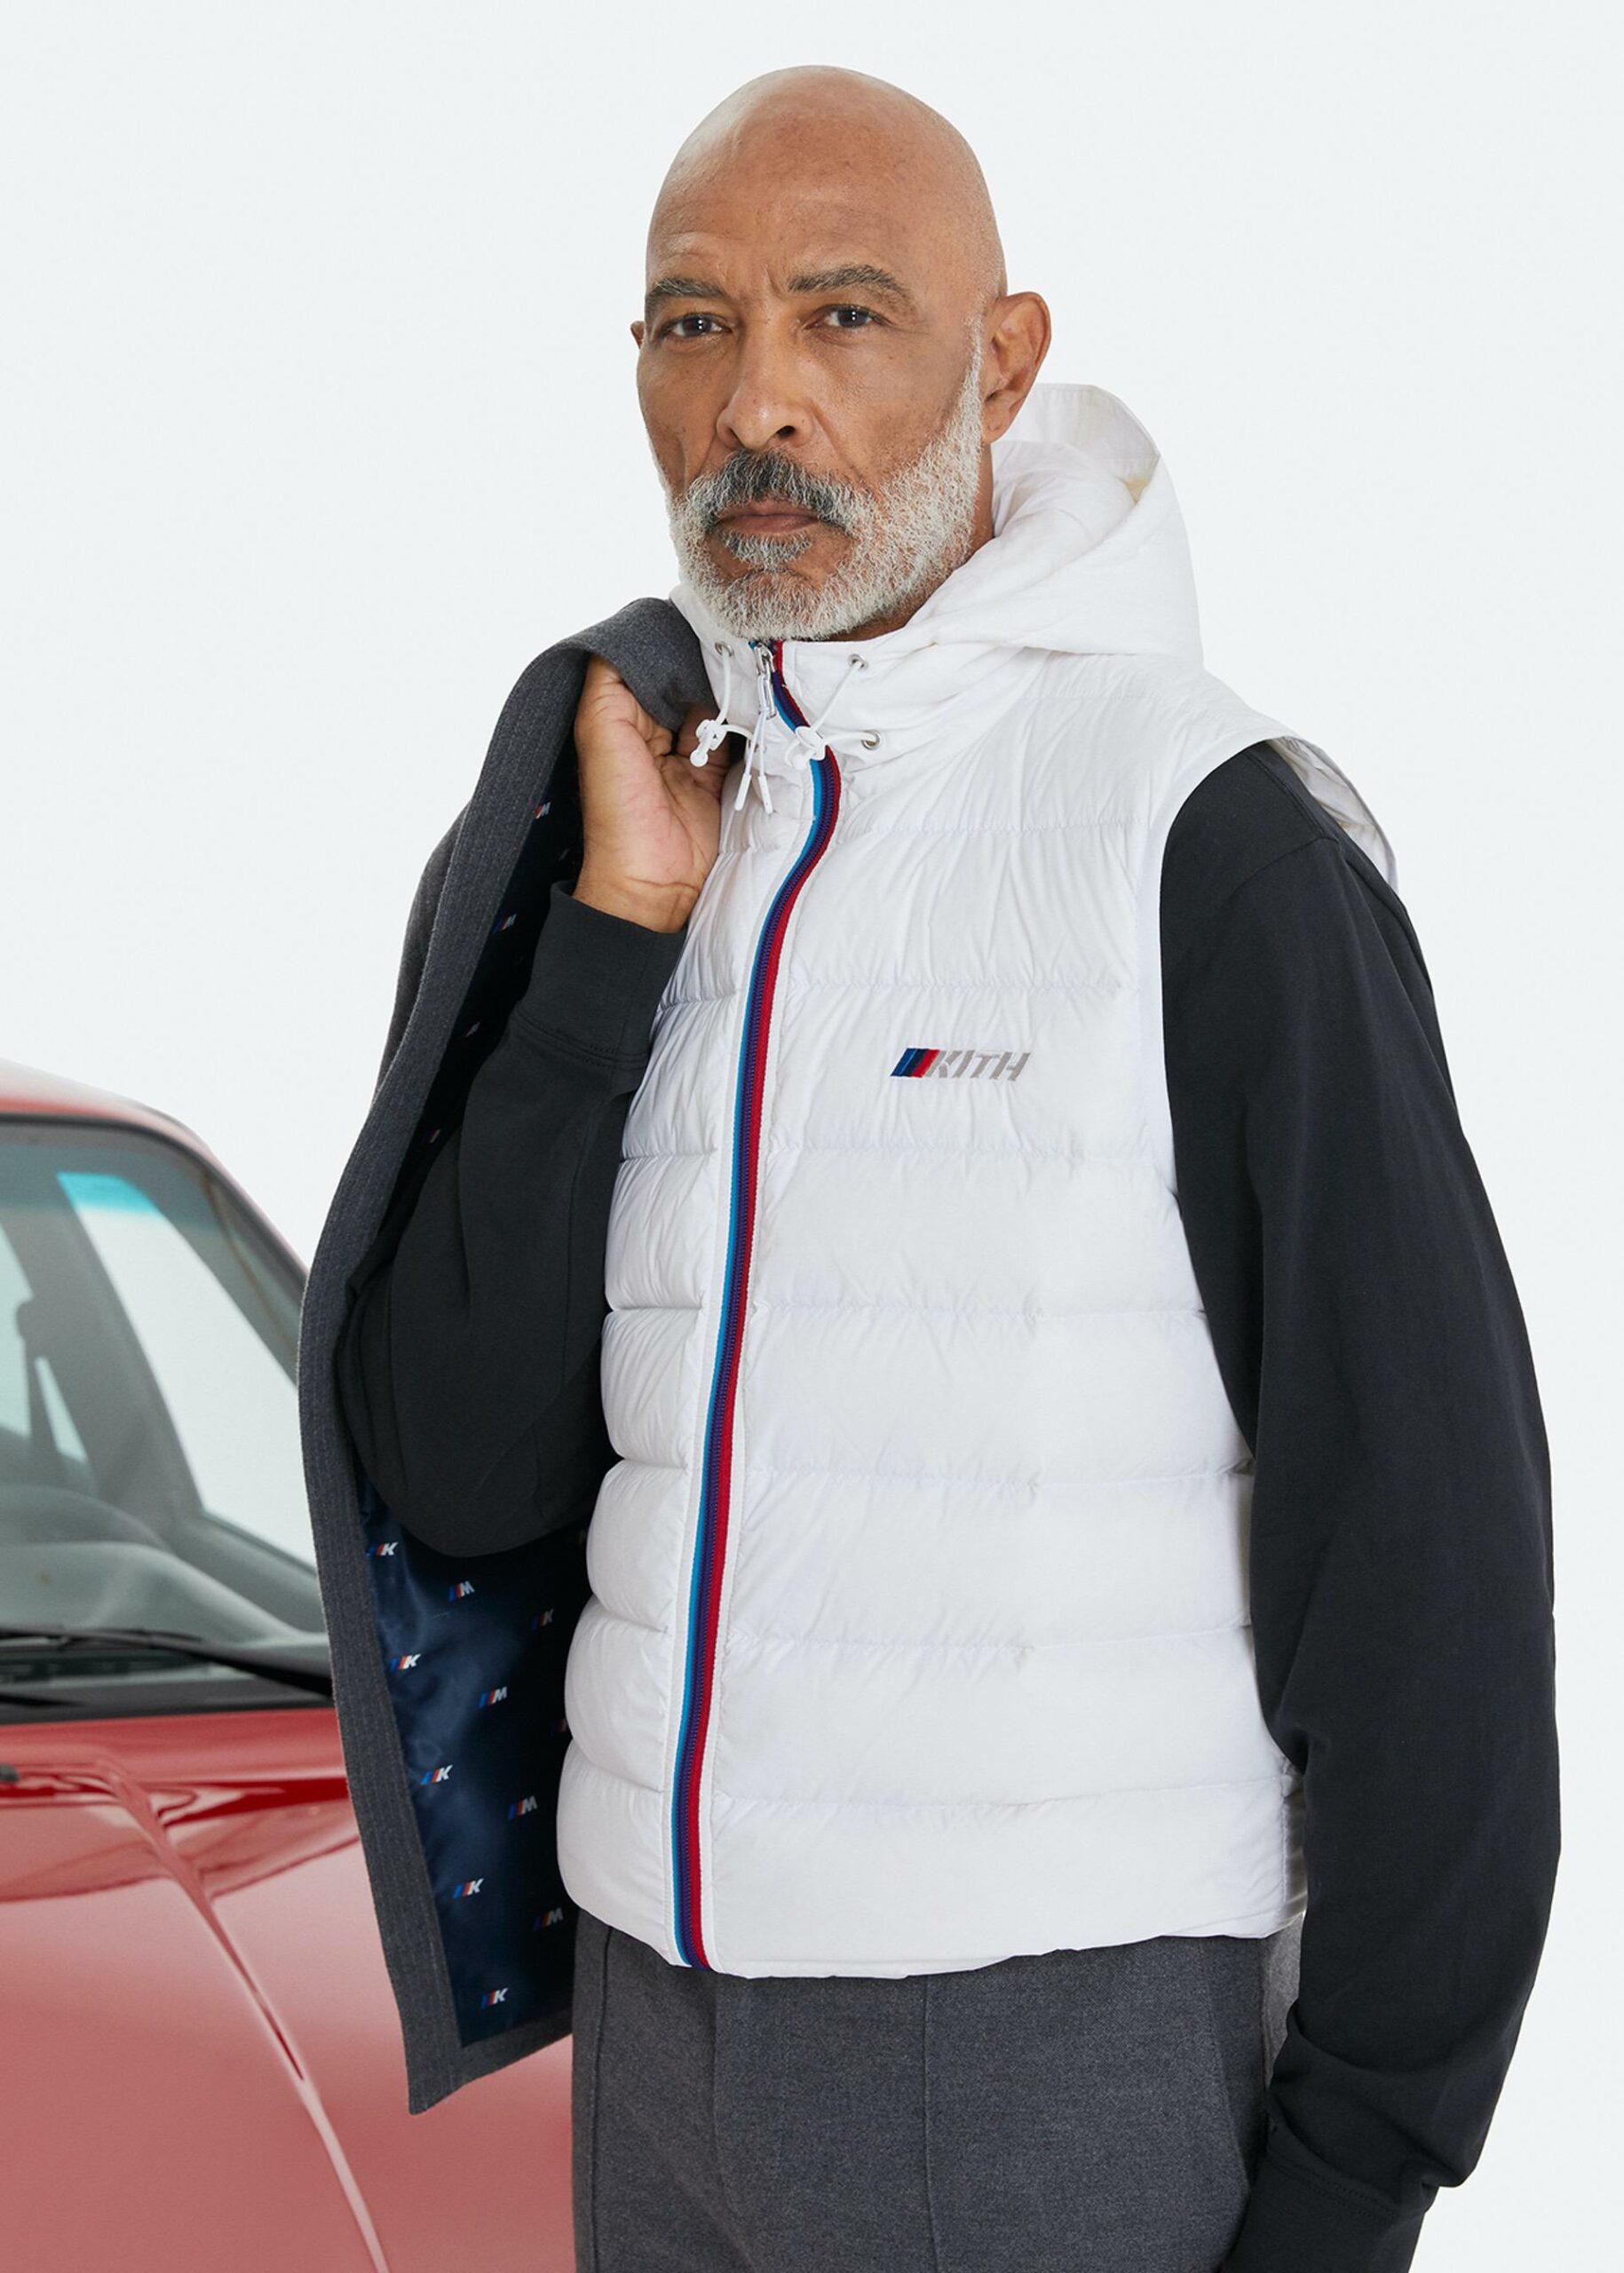 The Kith for BMW 2020 Collection features 94 pieces